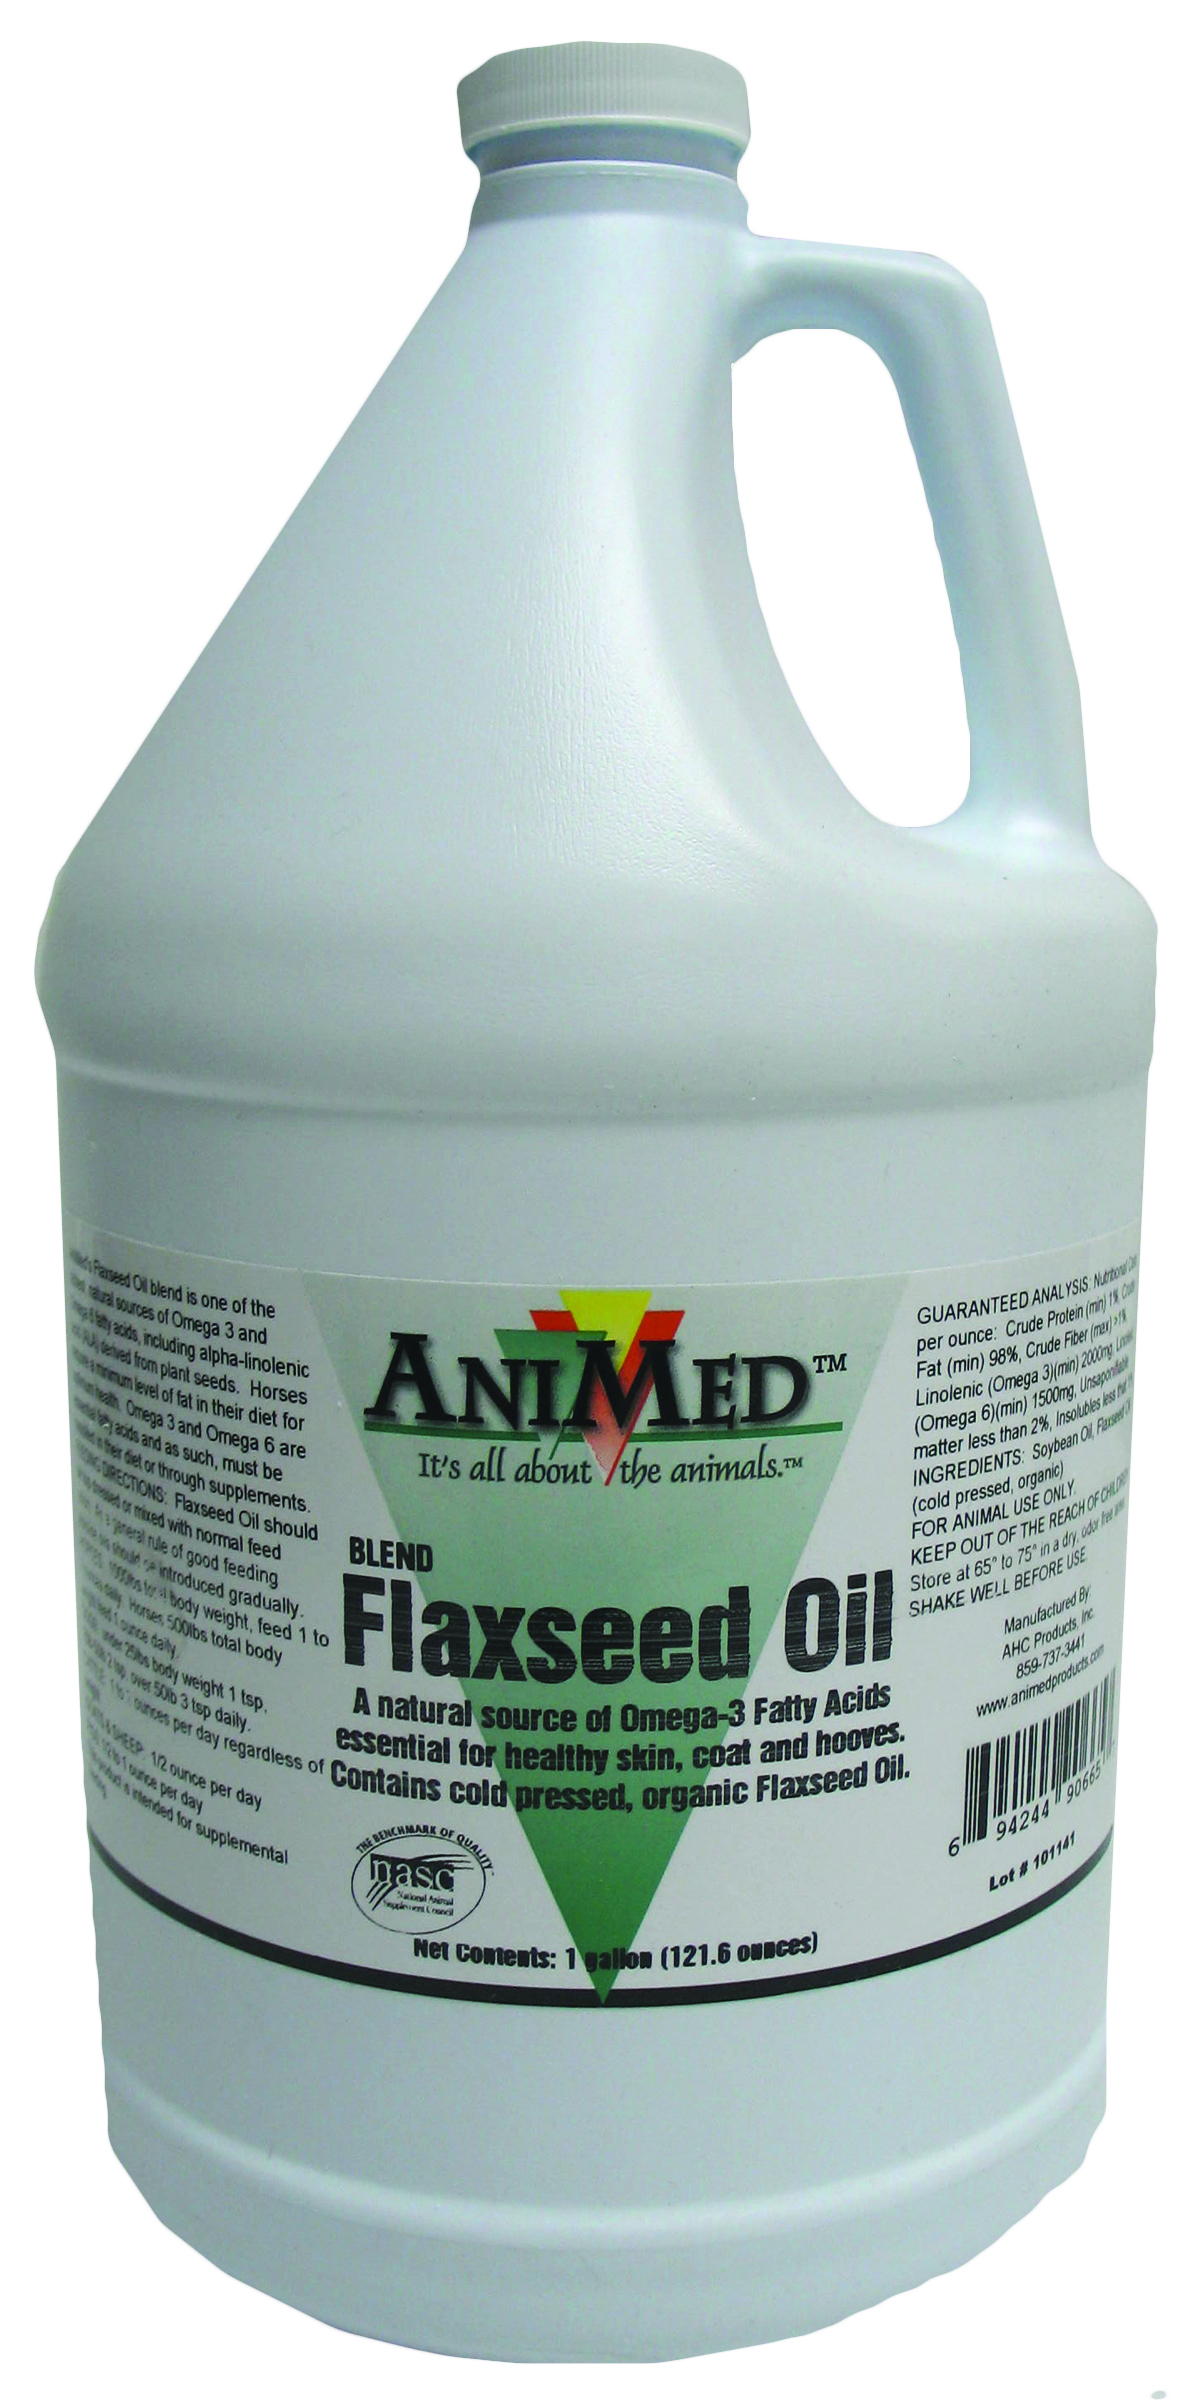 BLENDED FLAXSEED OIL